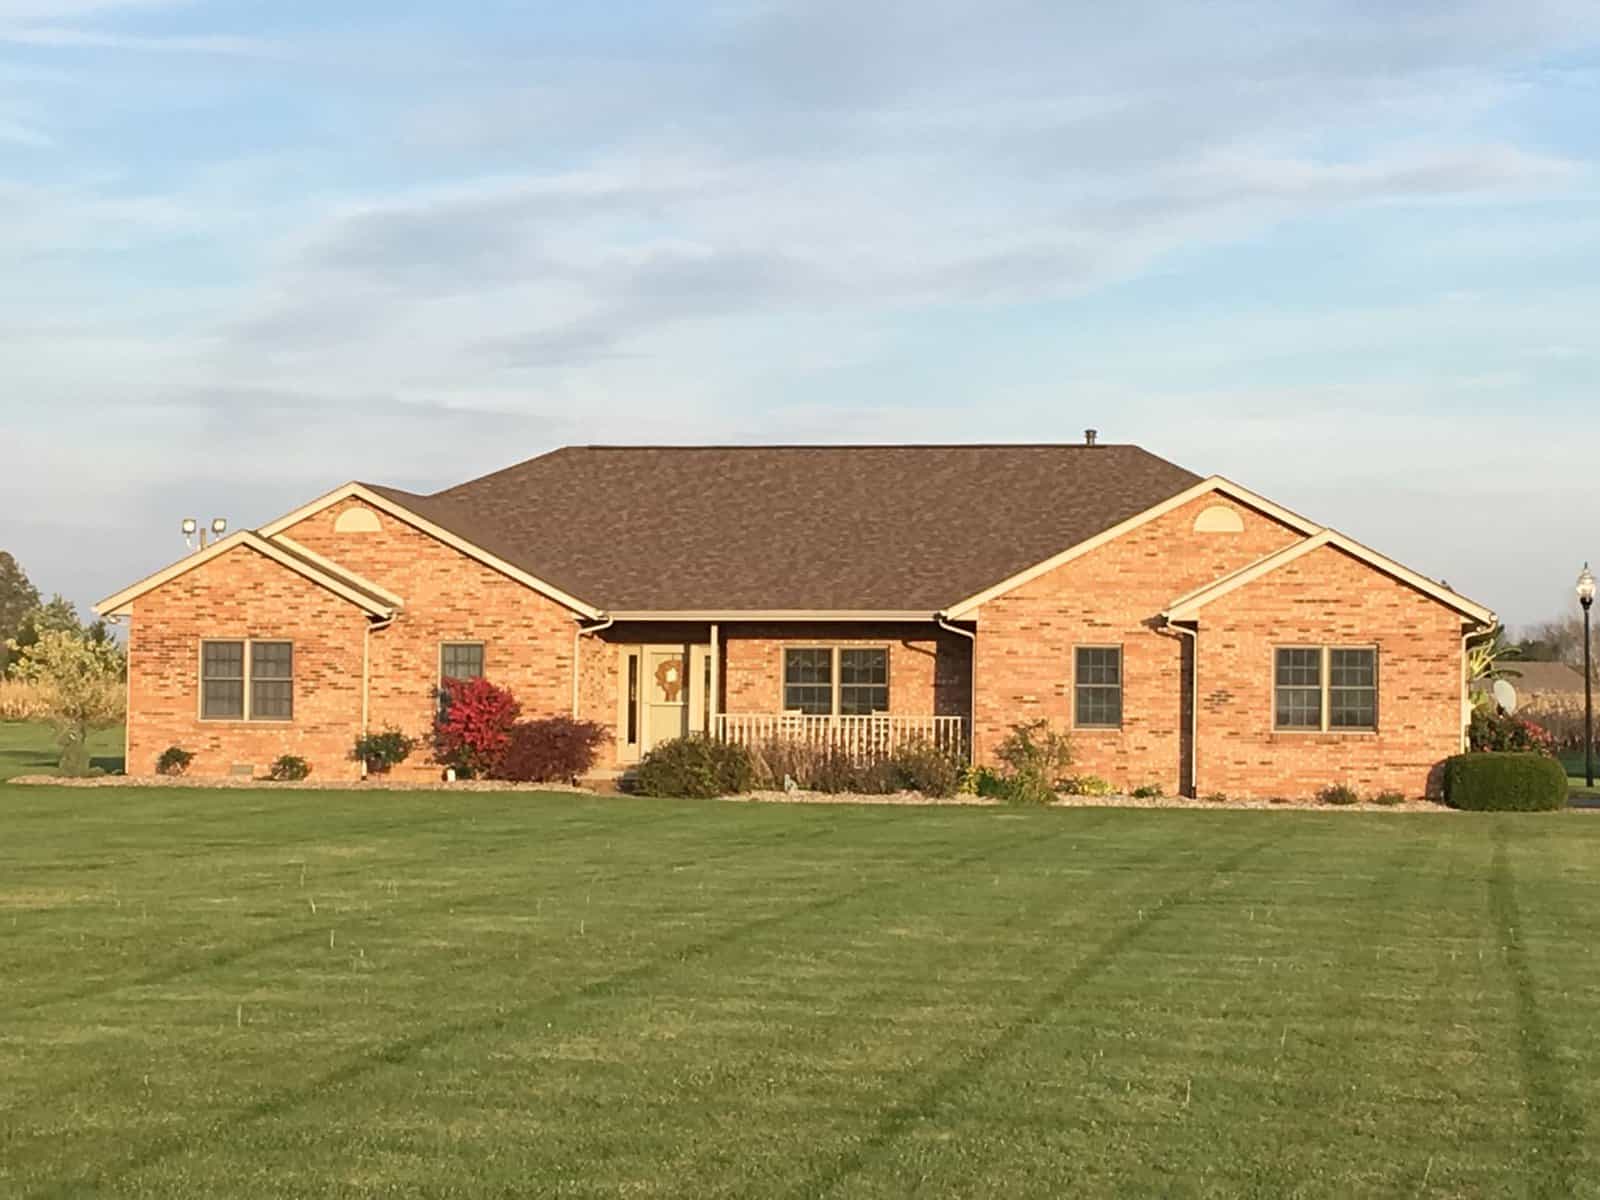 New roof in Shelbyville, Indiana. Indy Exterior Services